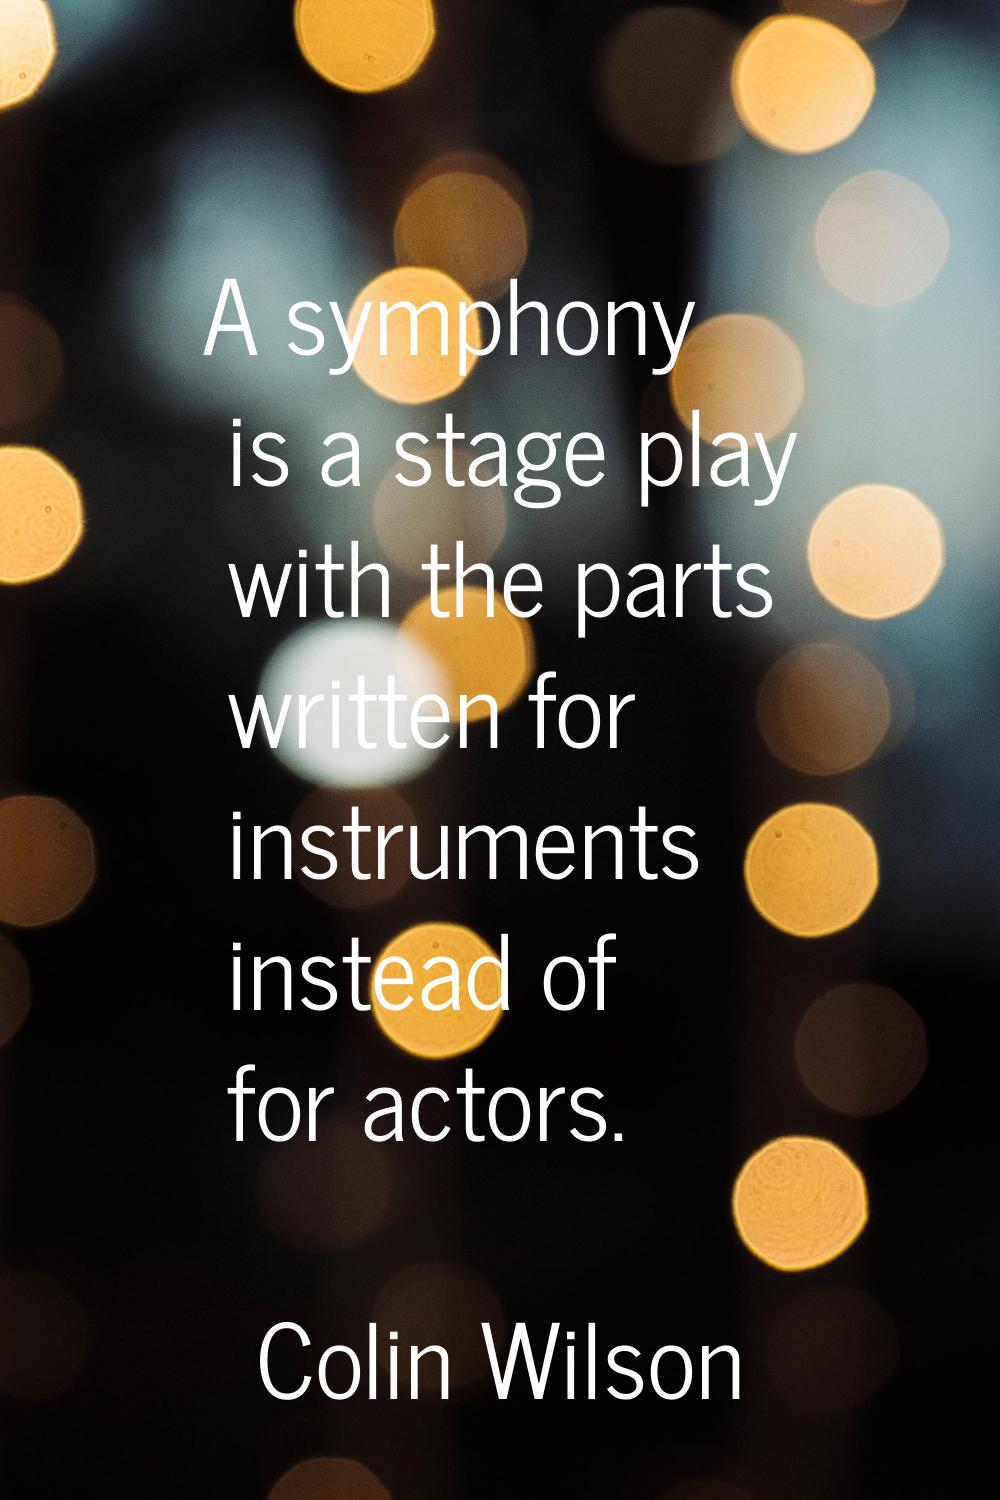 A symphony is a stage play with the parts written for instruments instead of for actors.